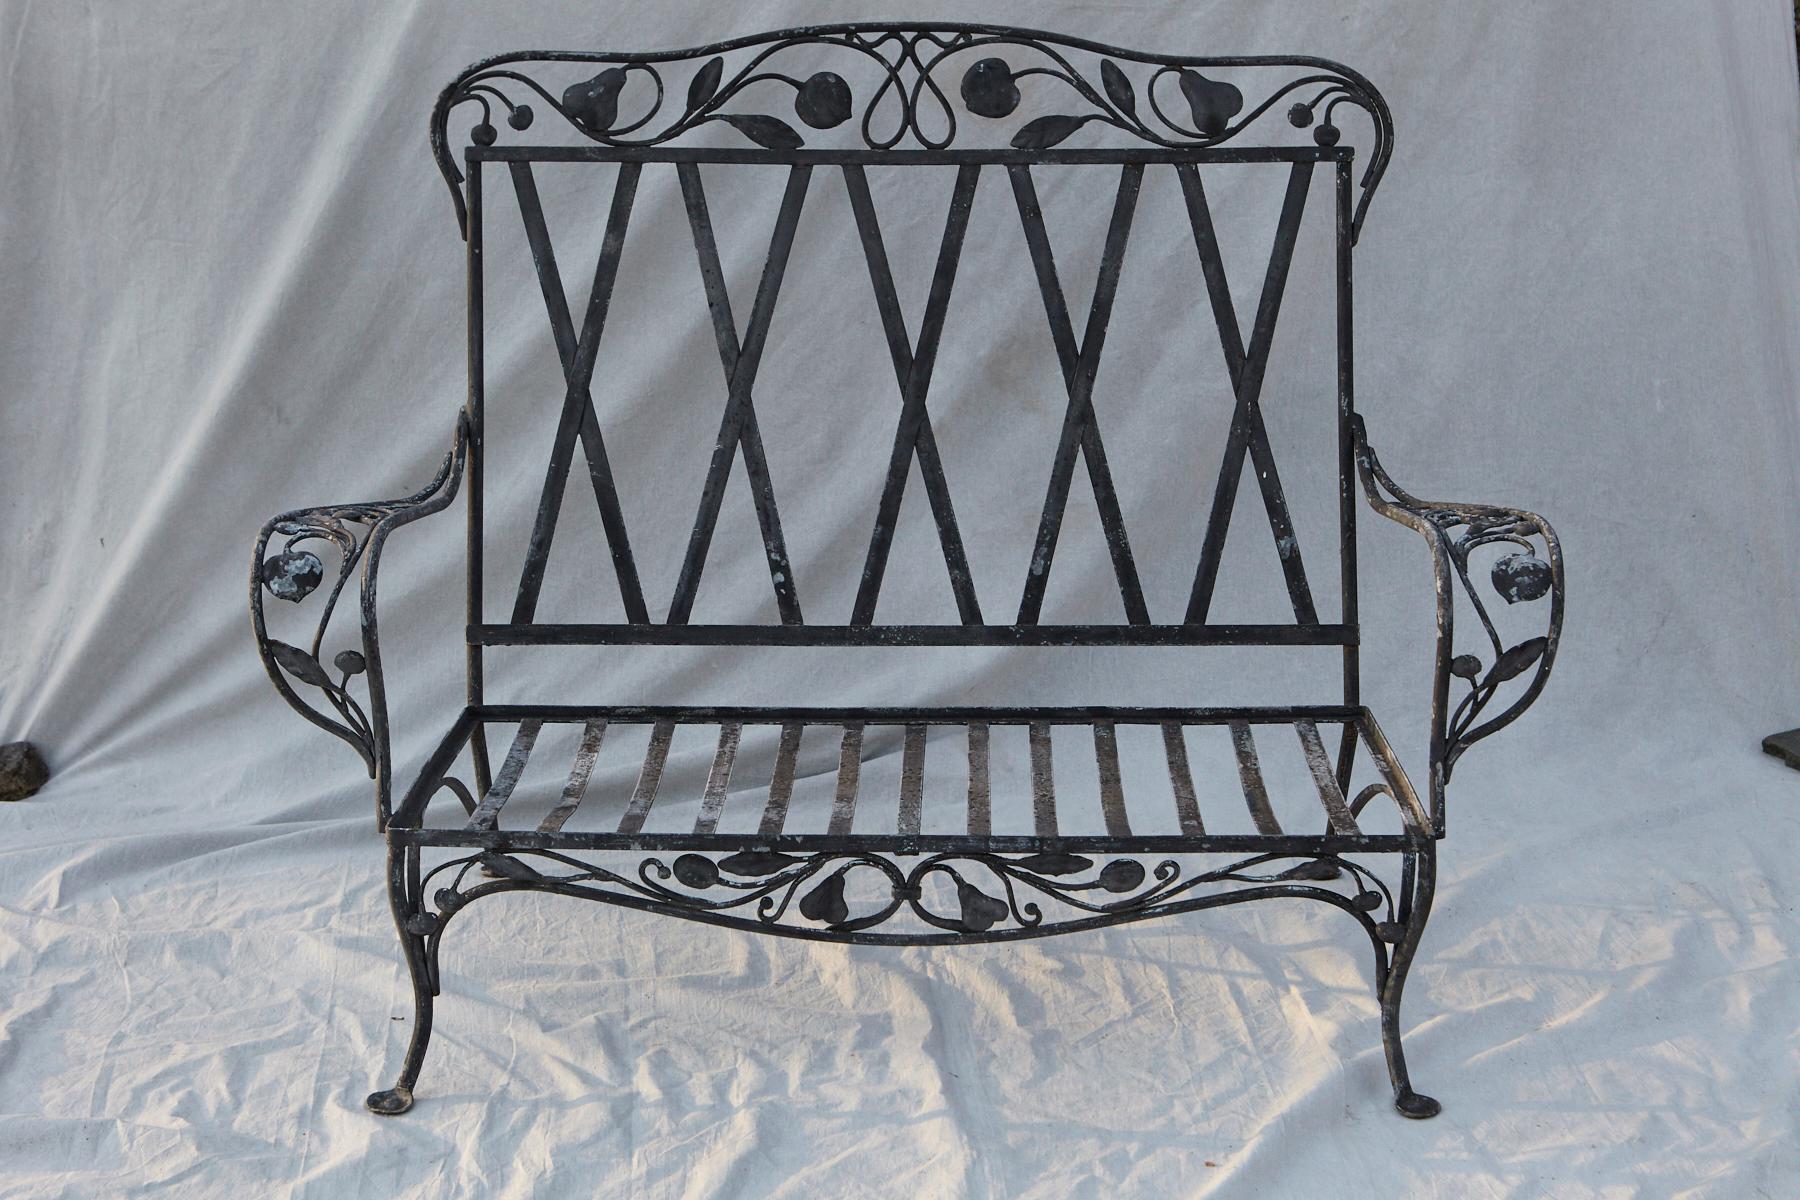 A rare Salterini elaborate wrought iron love seat from his Della Robbia Collection / Group from the 1940s.
The love seat is in a very good condition, solid and sturdy, part of the Neva-Rust outdoor product range of Salterin's garden furniture.
The